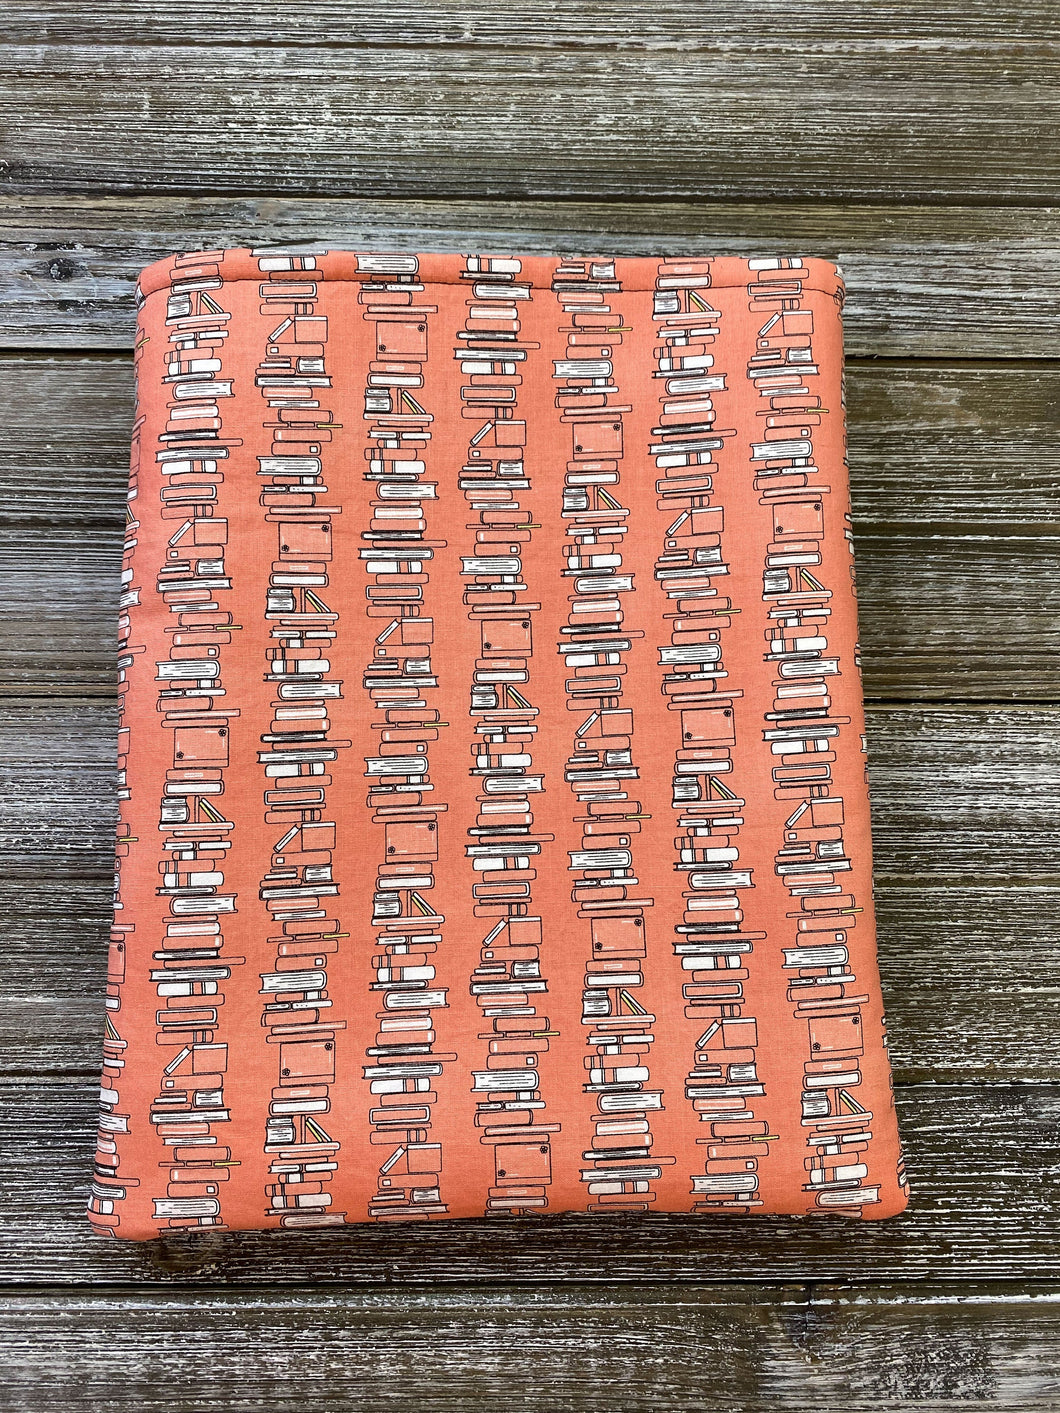 Coral Book Stacks Padded Book Sleeve | BookGoodies | Book Pocket | Protective Book Bag | Book Pouch | Bookish Nerd Gift